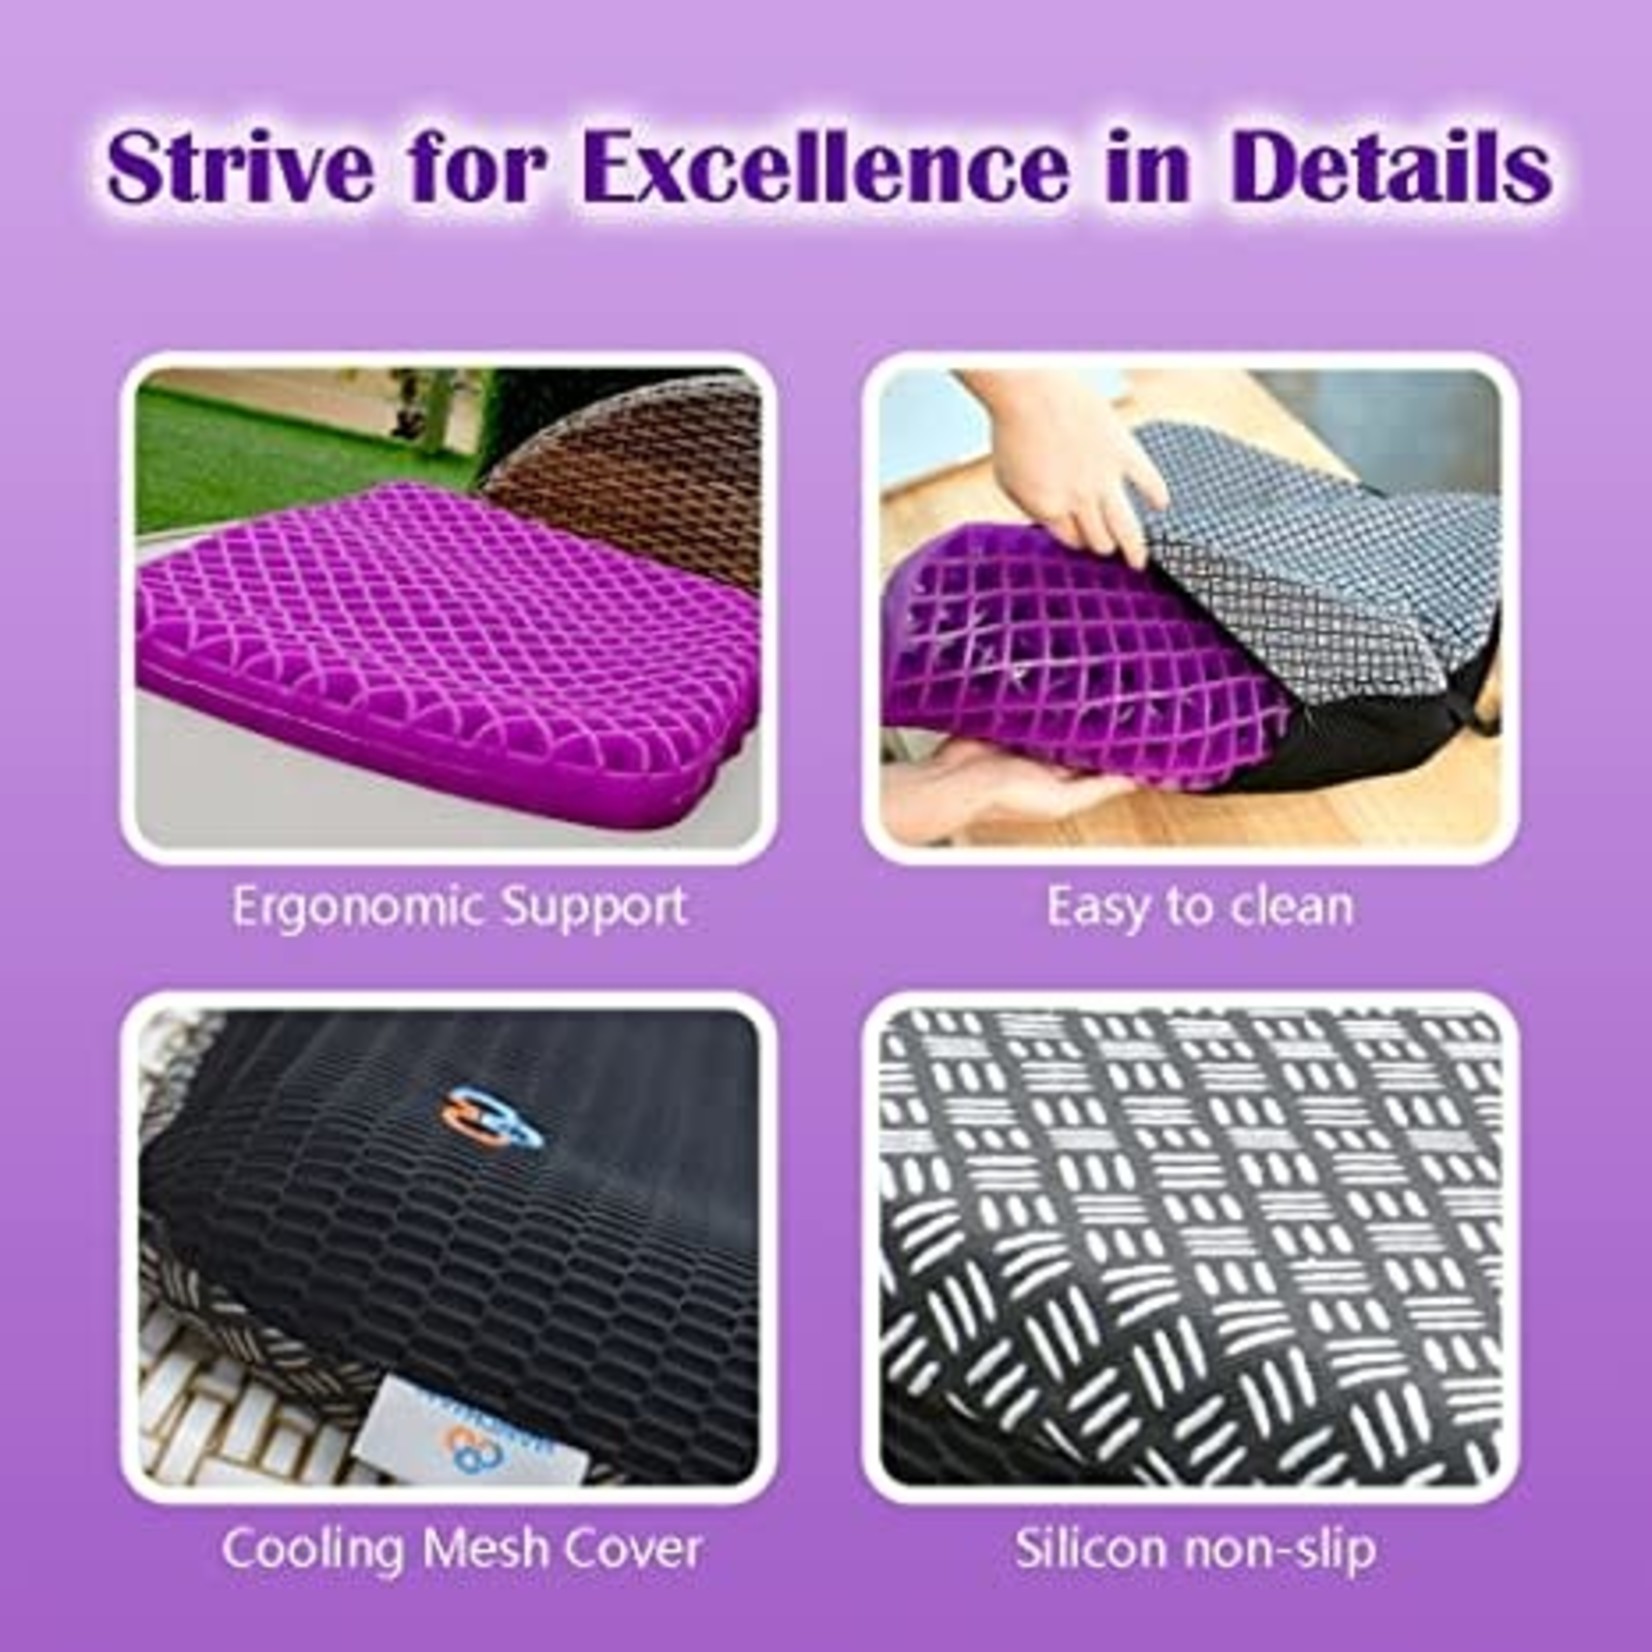 Gel Seat Cushion For Long Sitting Ventilated Office Chair Cushion Pad For  Summer Cooling Non-slip